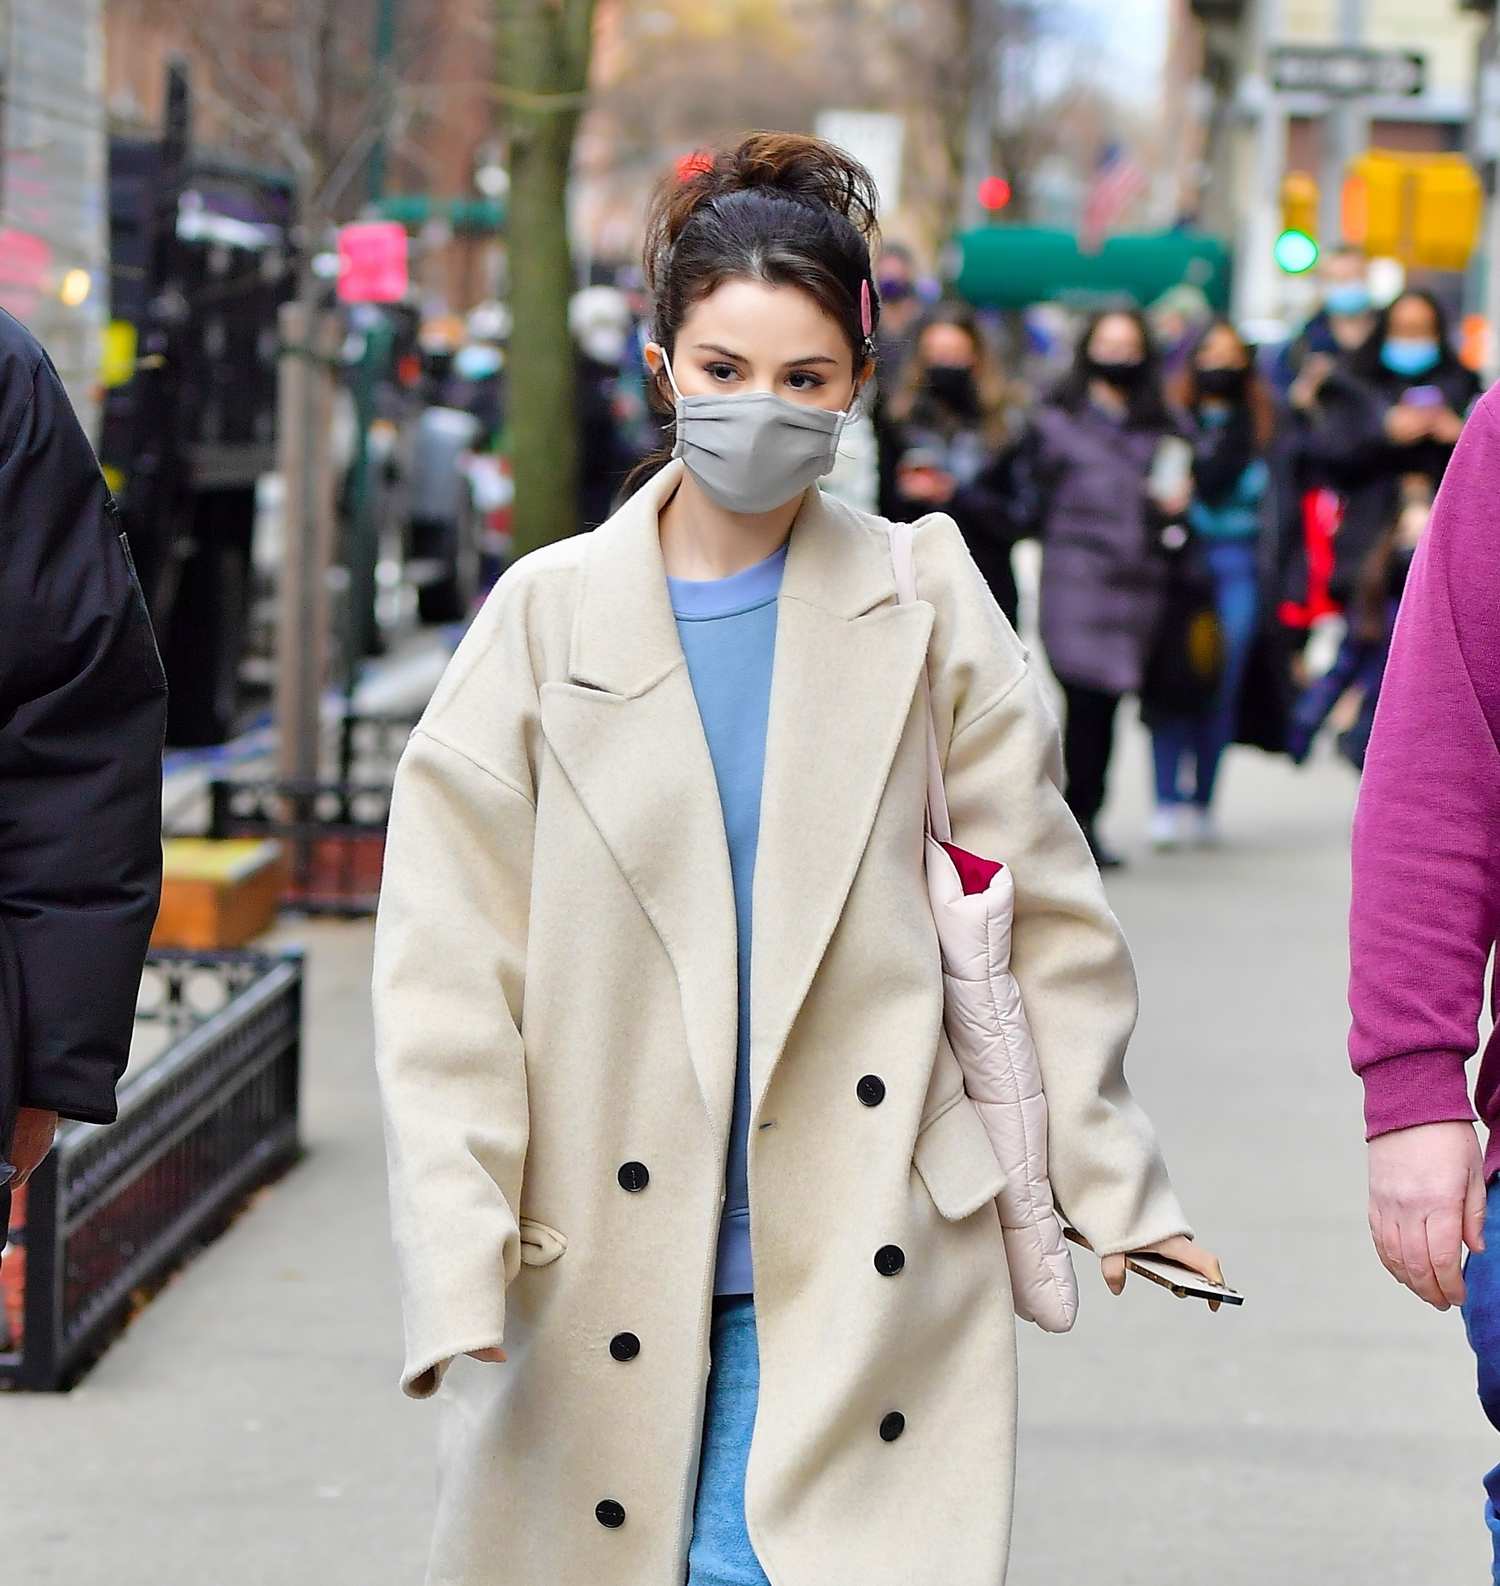 Selena_Gomez_-_heads_to_the_set_of_Only_Murders_in_The_Building_in_New_York_City2C_01172021_03.jpg